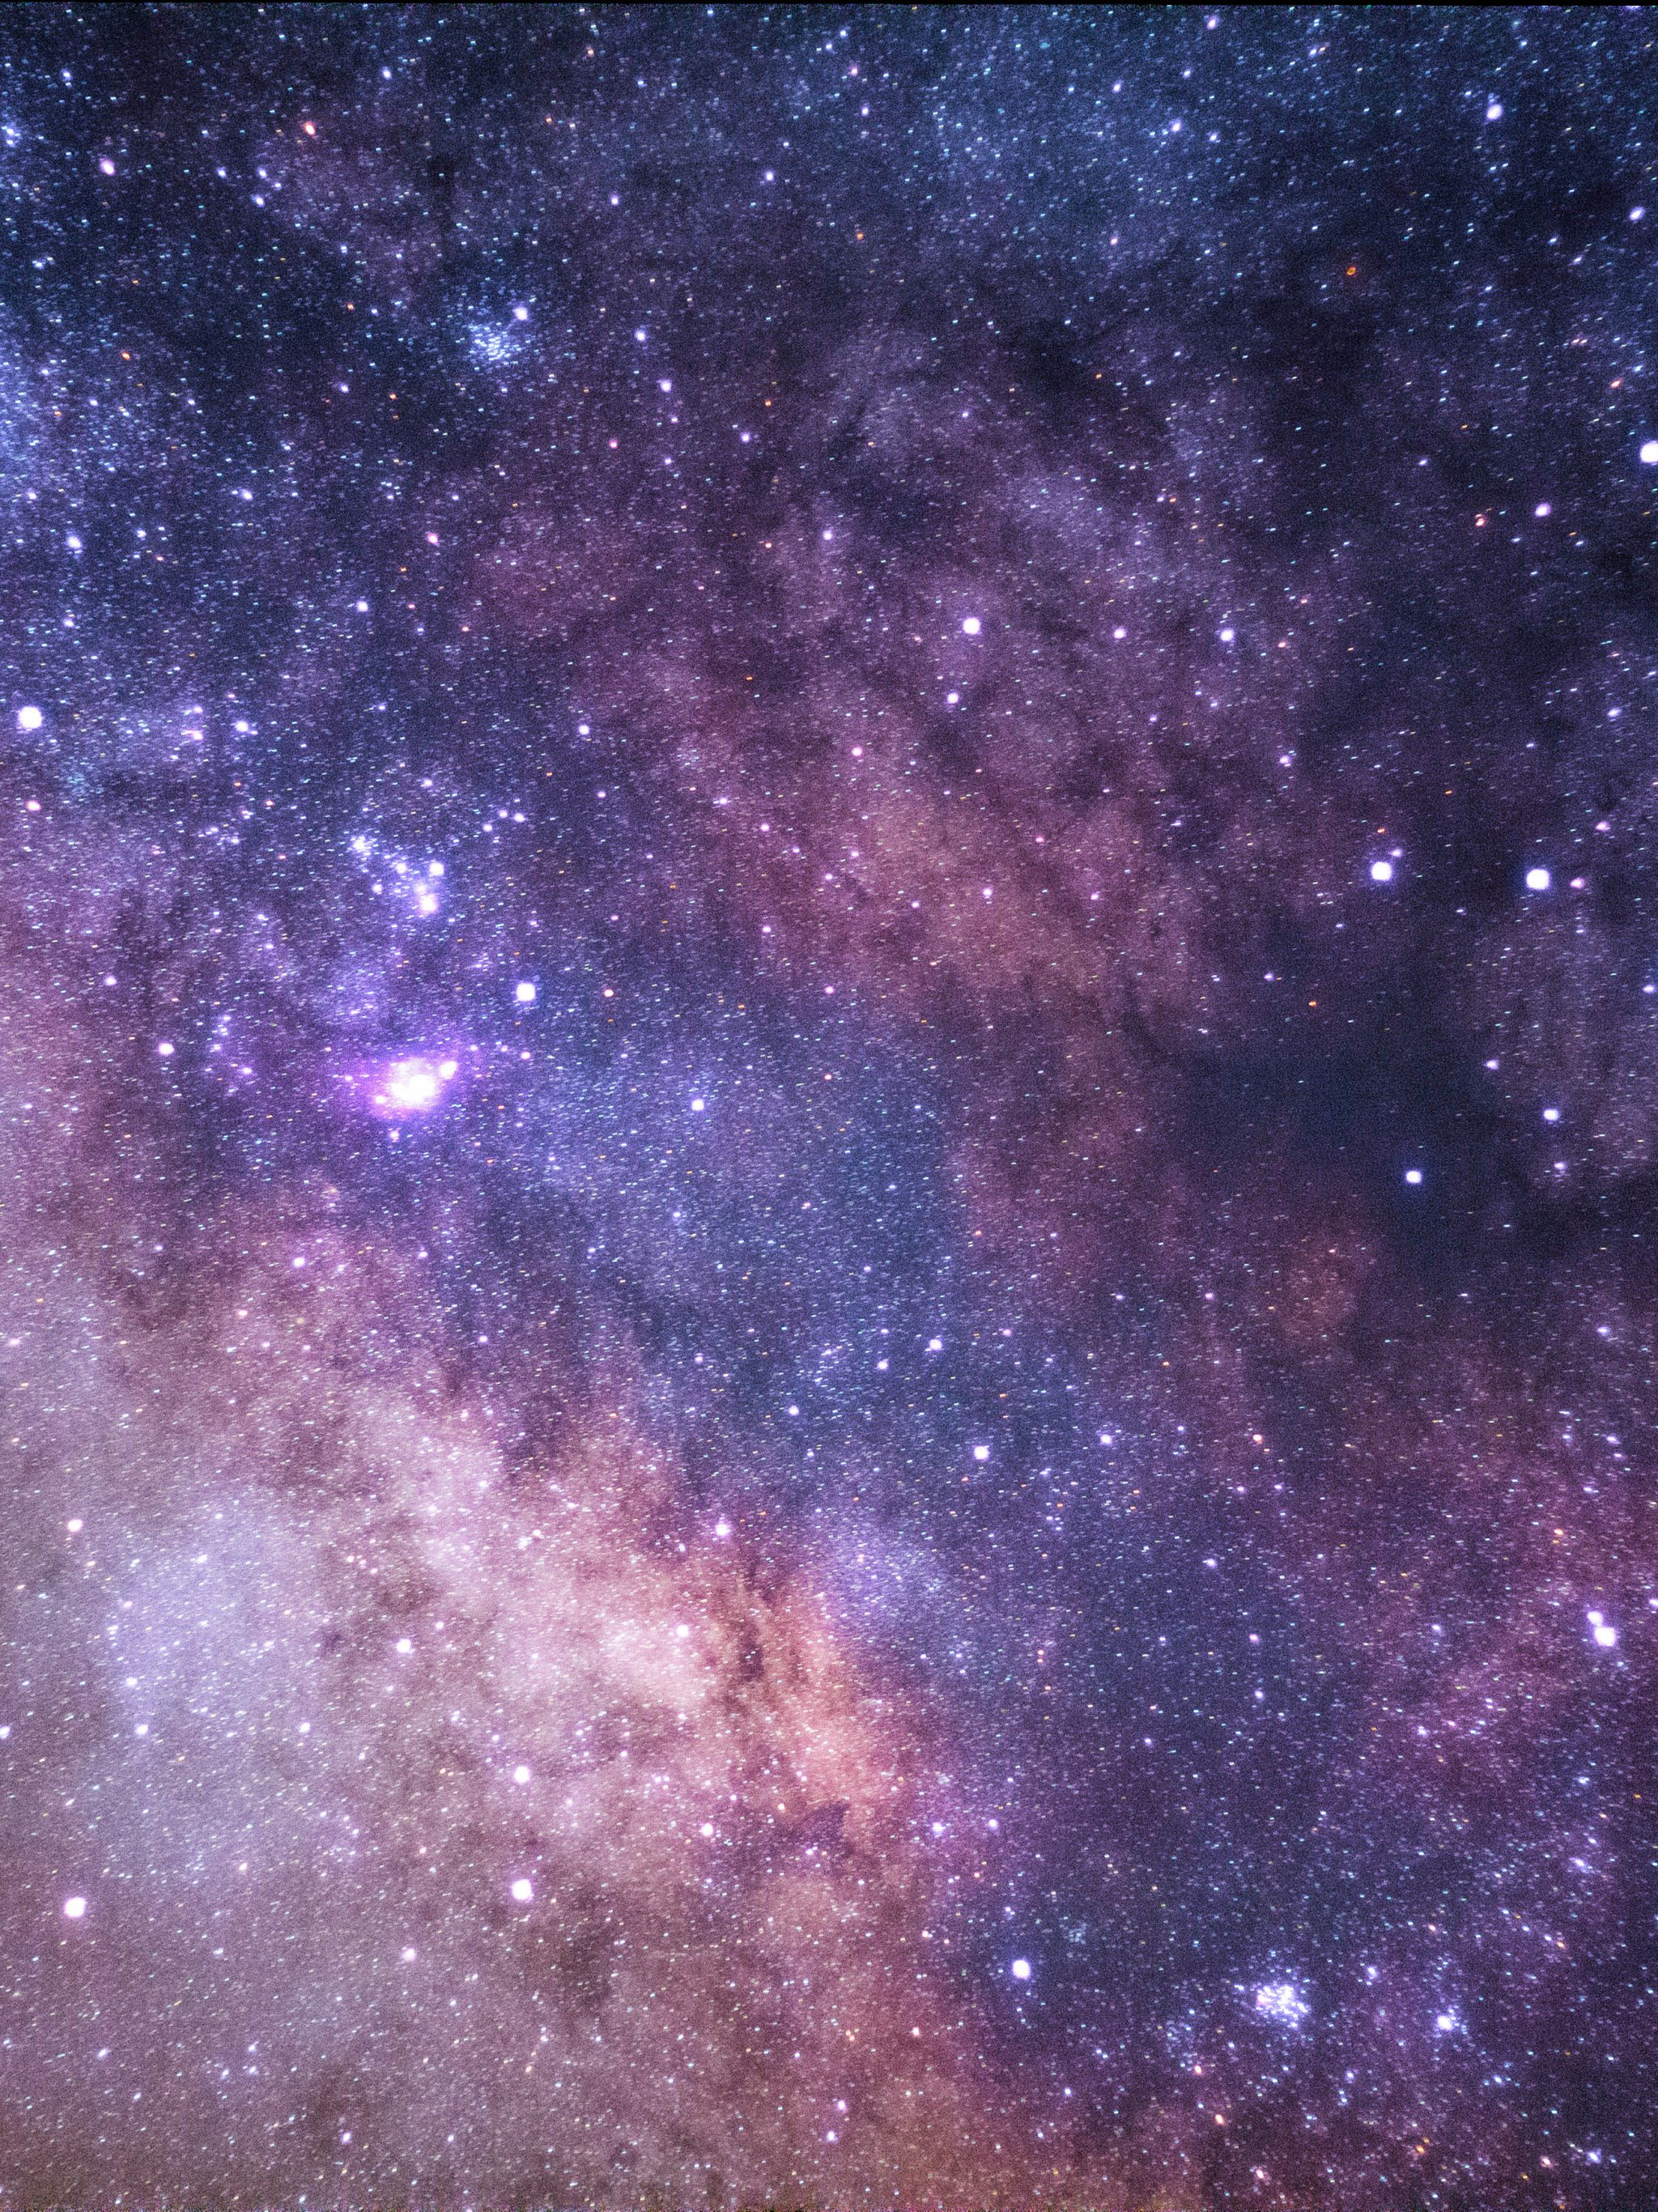 Galaxy Wallpaper - iPhone, Android & Desktop Backgrounds